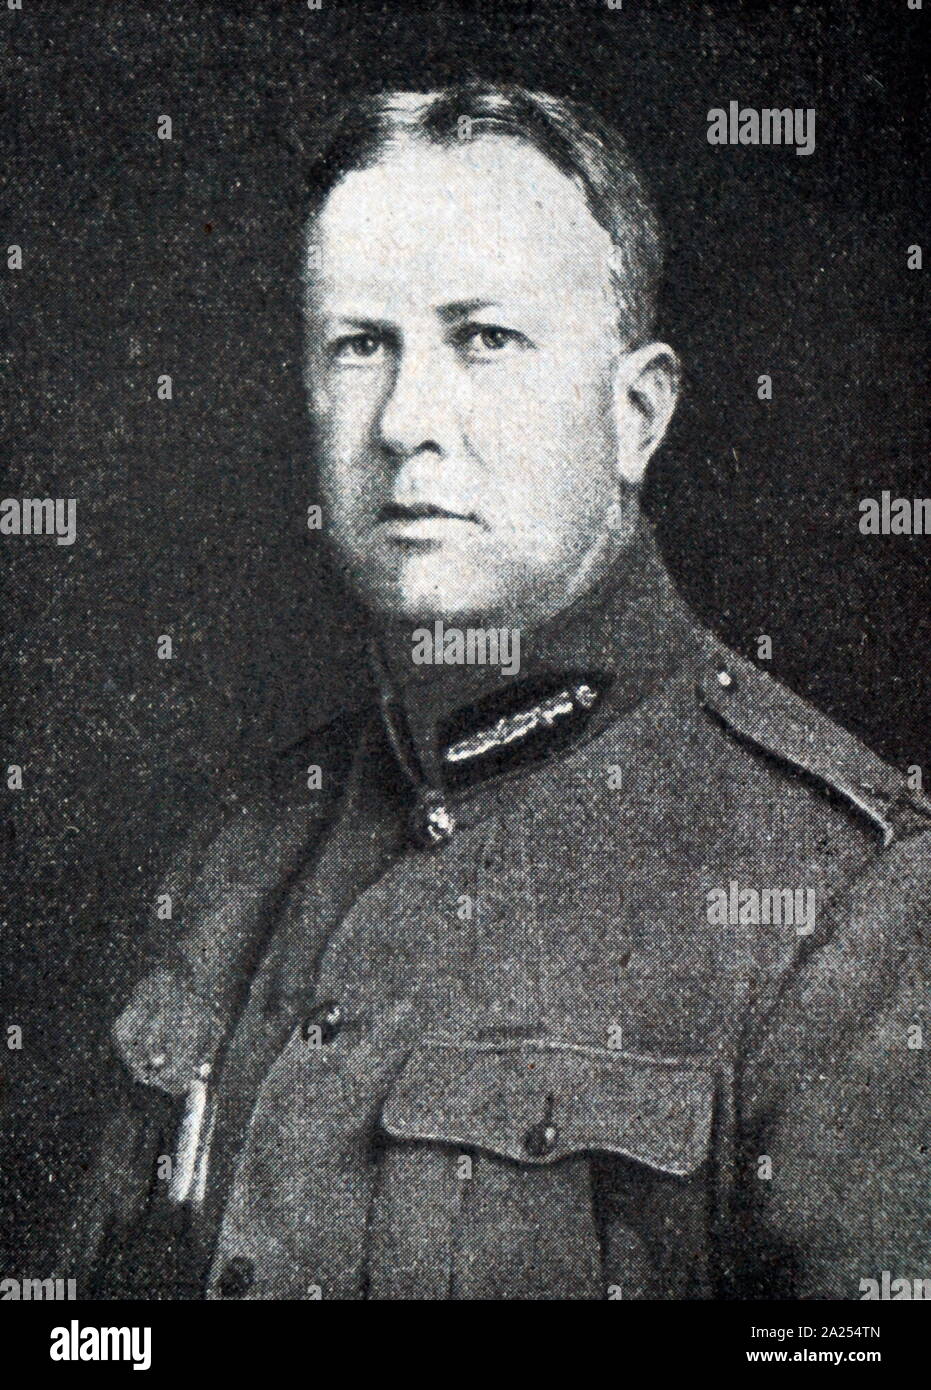 General Sir Arthur William Currie, (1875 - 1933) senior officer of the Canadian Army who fought during World War I. Stock Photo